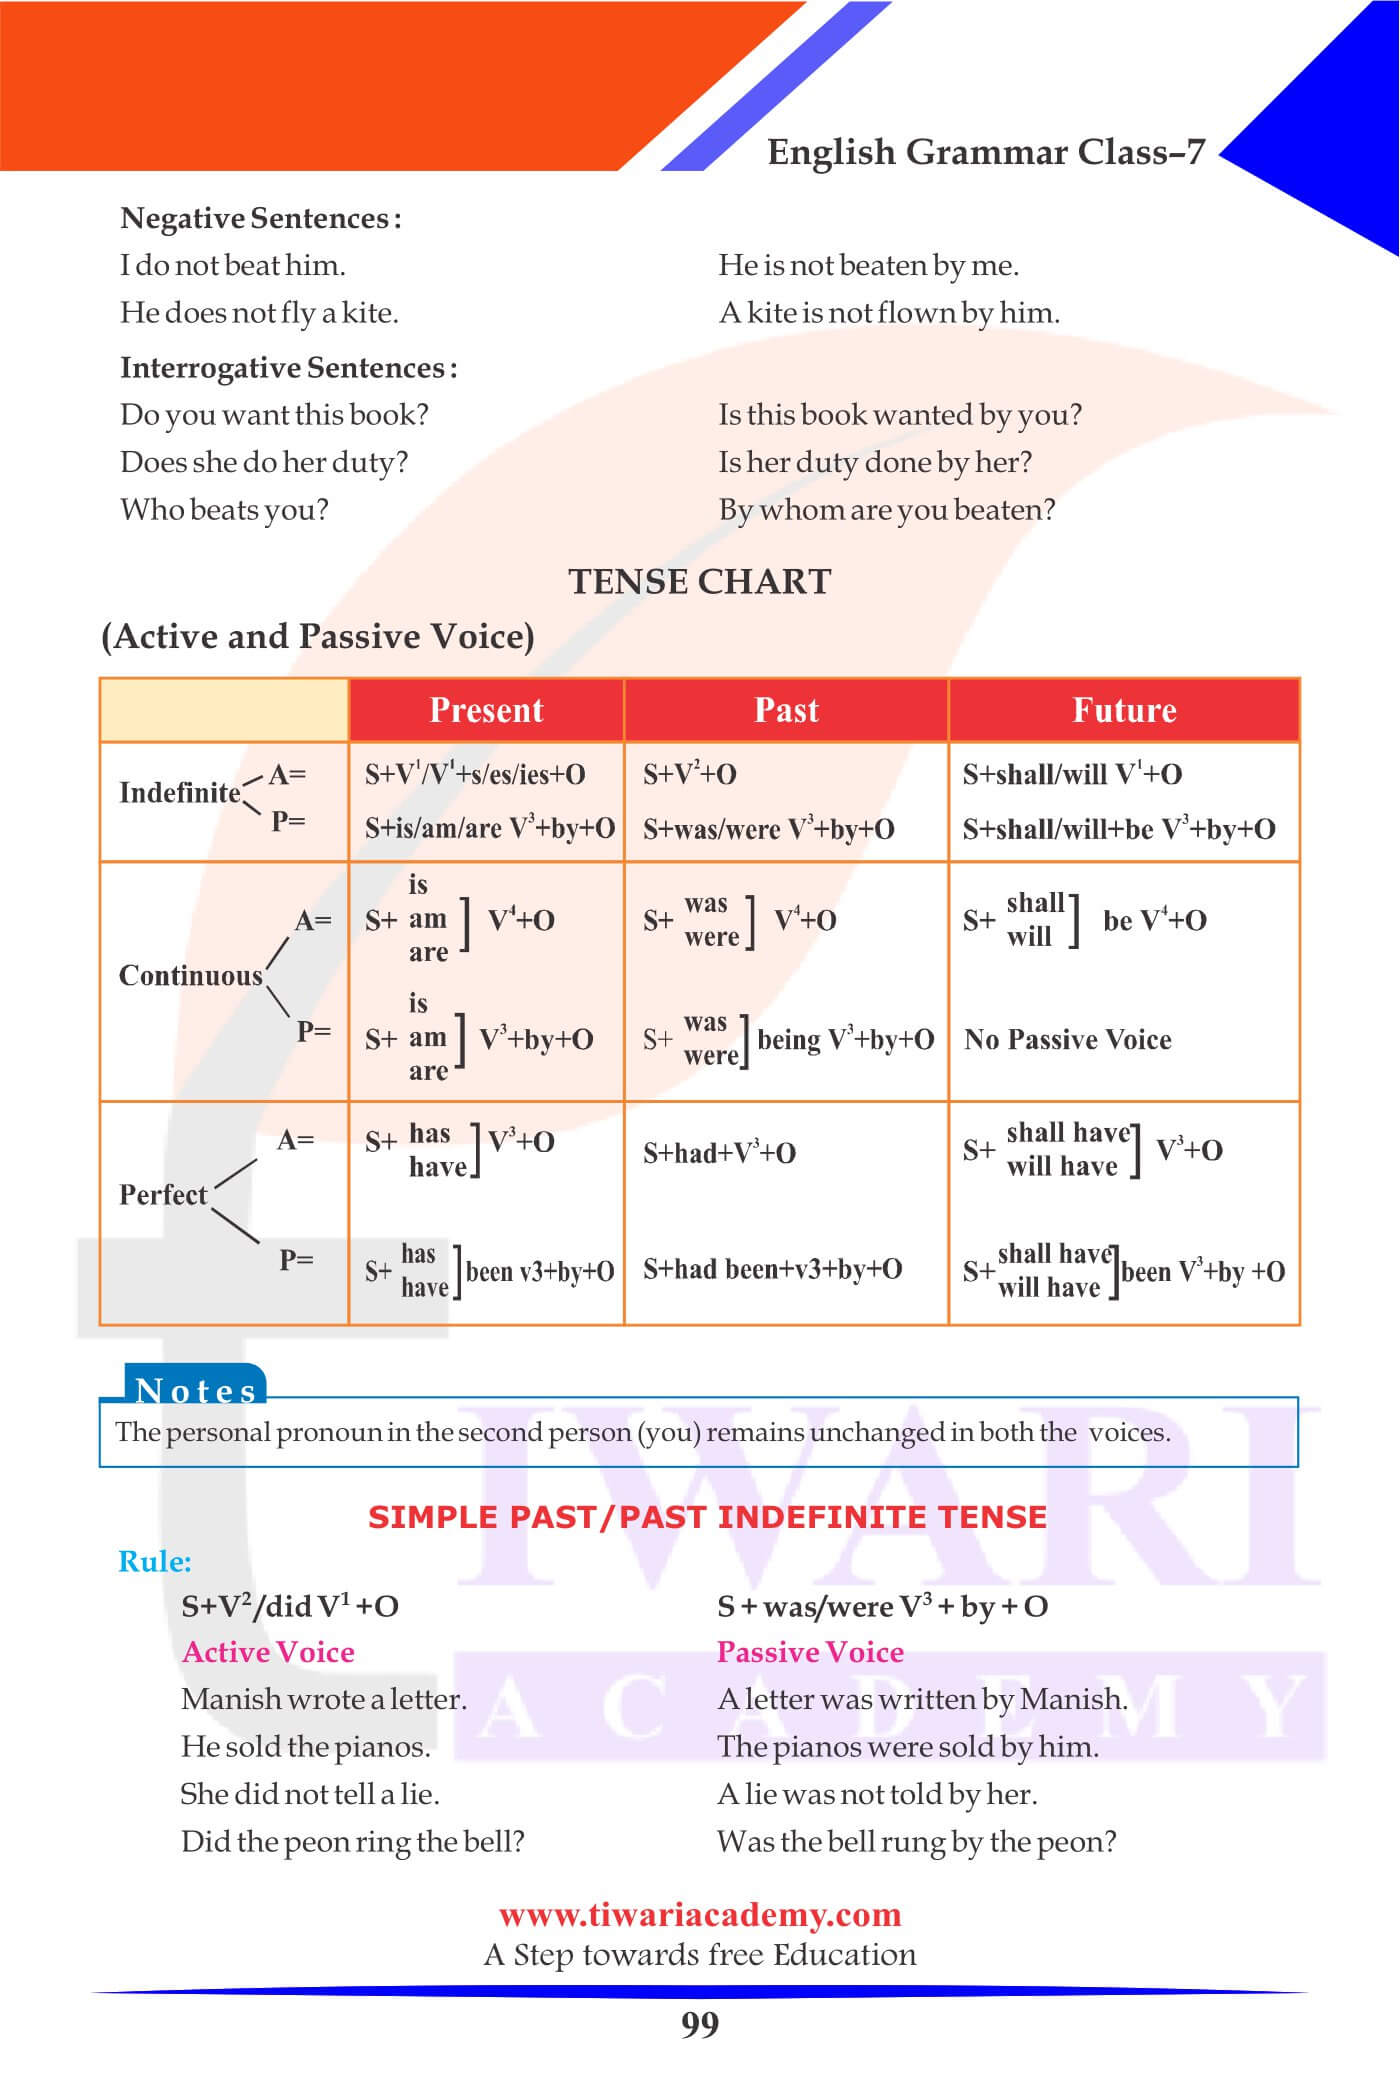 Class 7 Grammar Chapter 16 The Active and Passive Voice